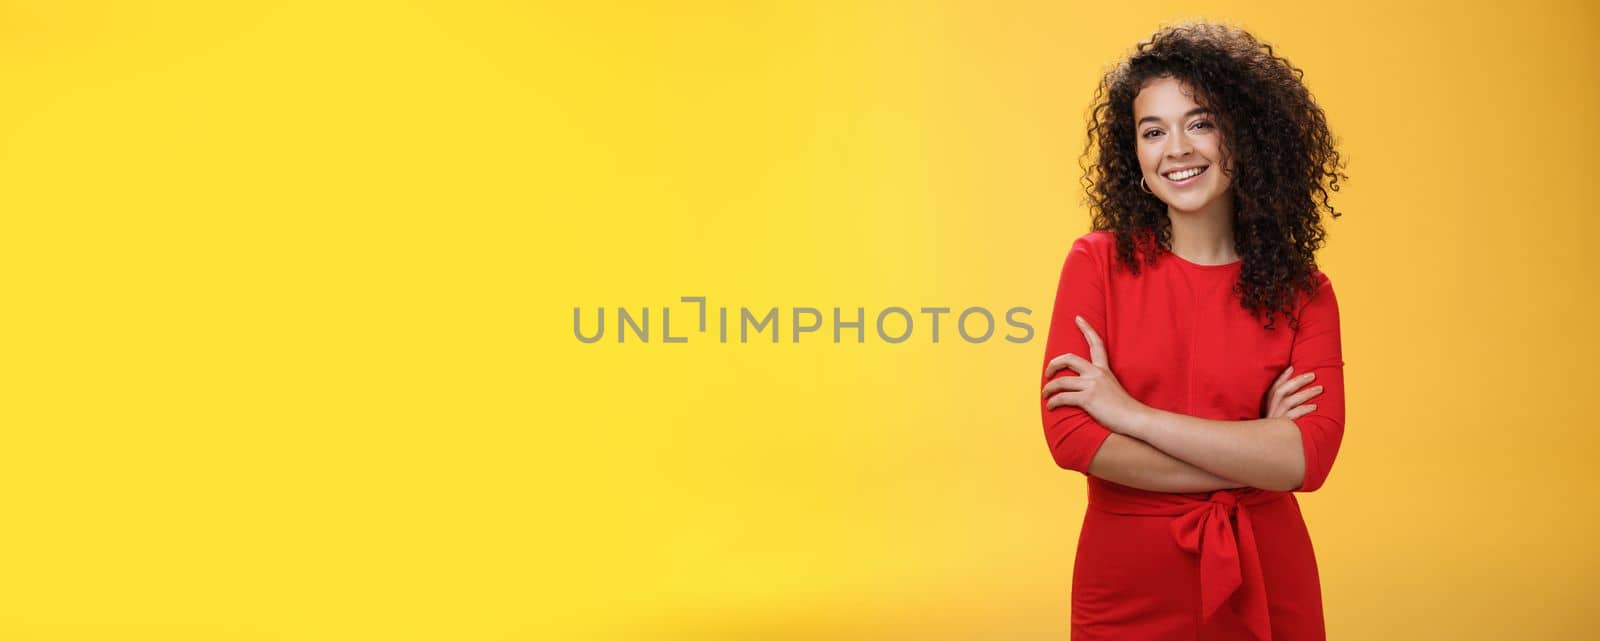 Confident charismatic young curly-haired woman in casual red dress holding hands crossed over chest in self-assured satisfied expression, smiling delighted posing over yellow background.